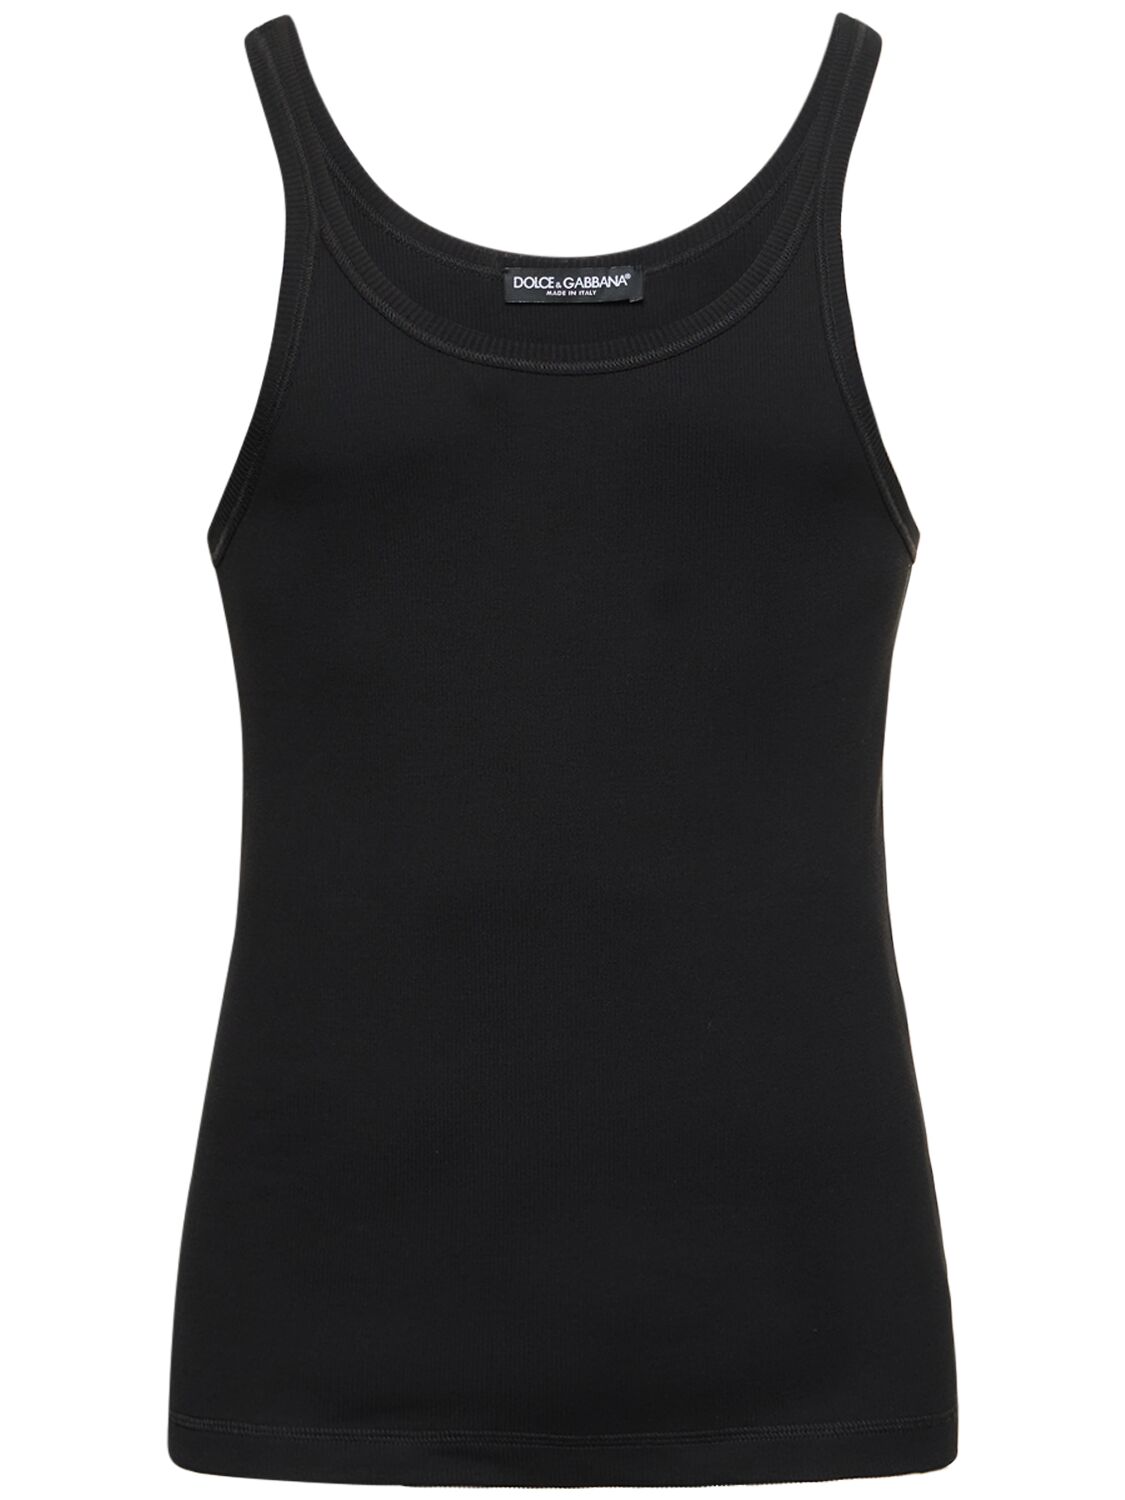 Ribbed Cotton Jersey Tank Top